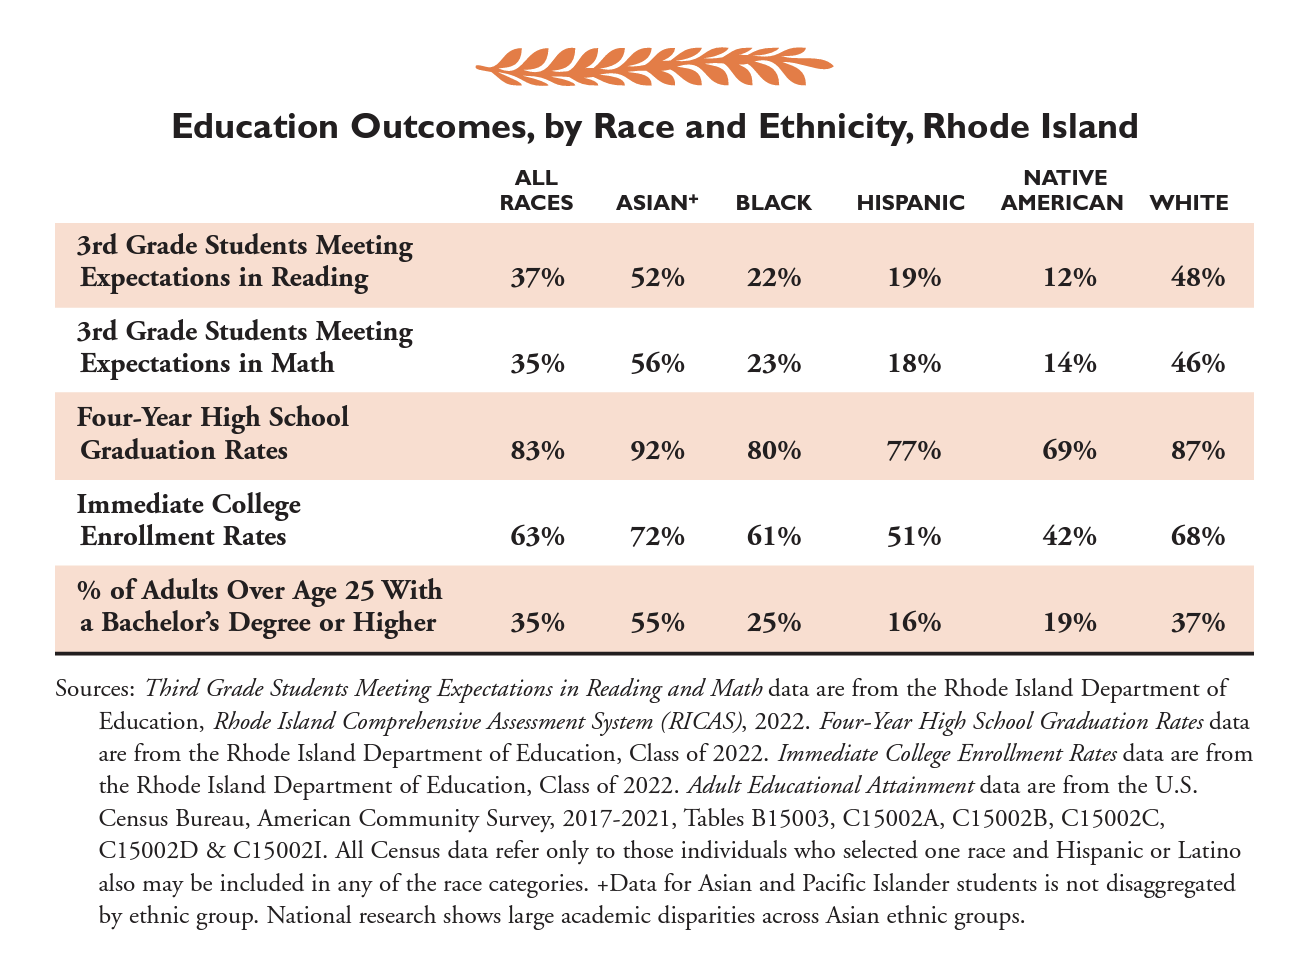 Education Outcomes, by Race and Ethnicity, Rhode Island